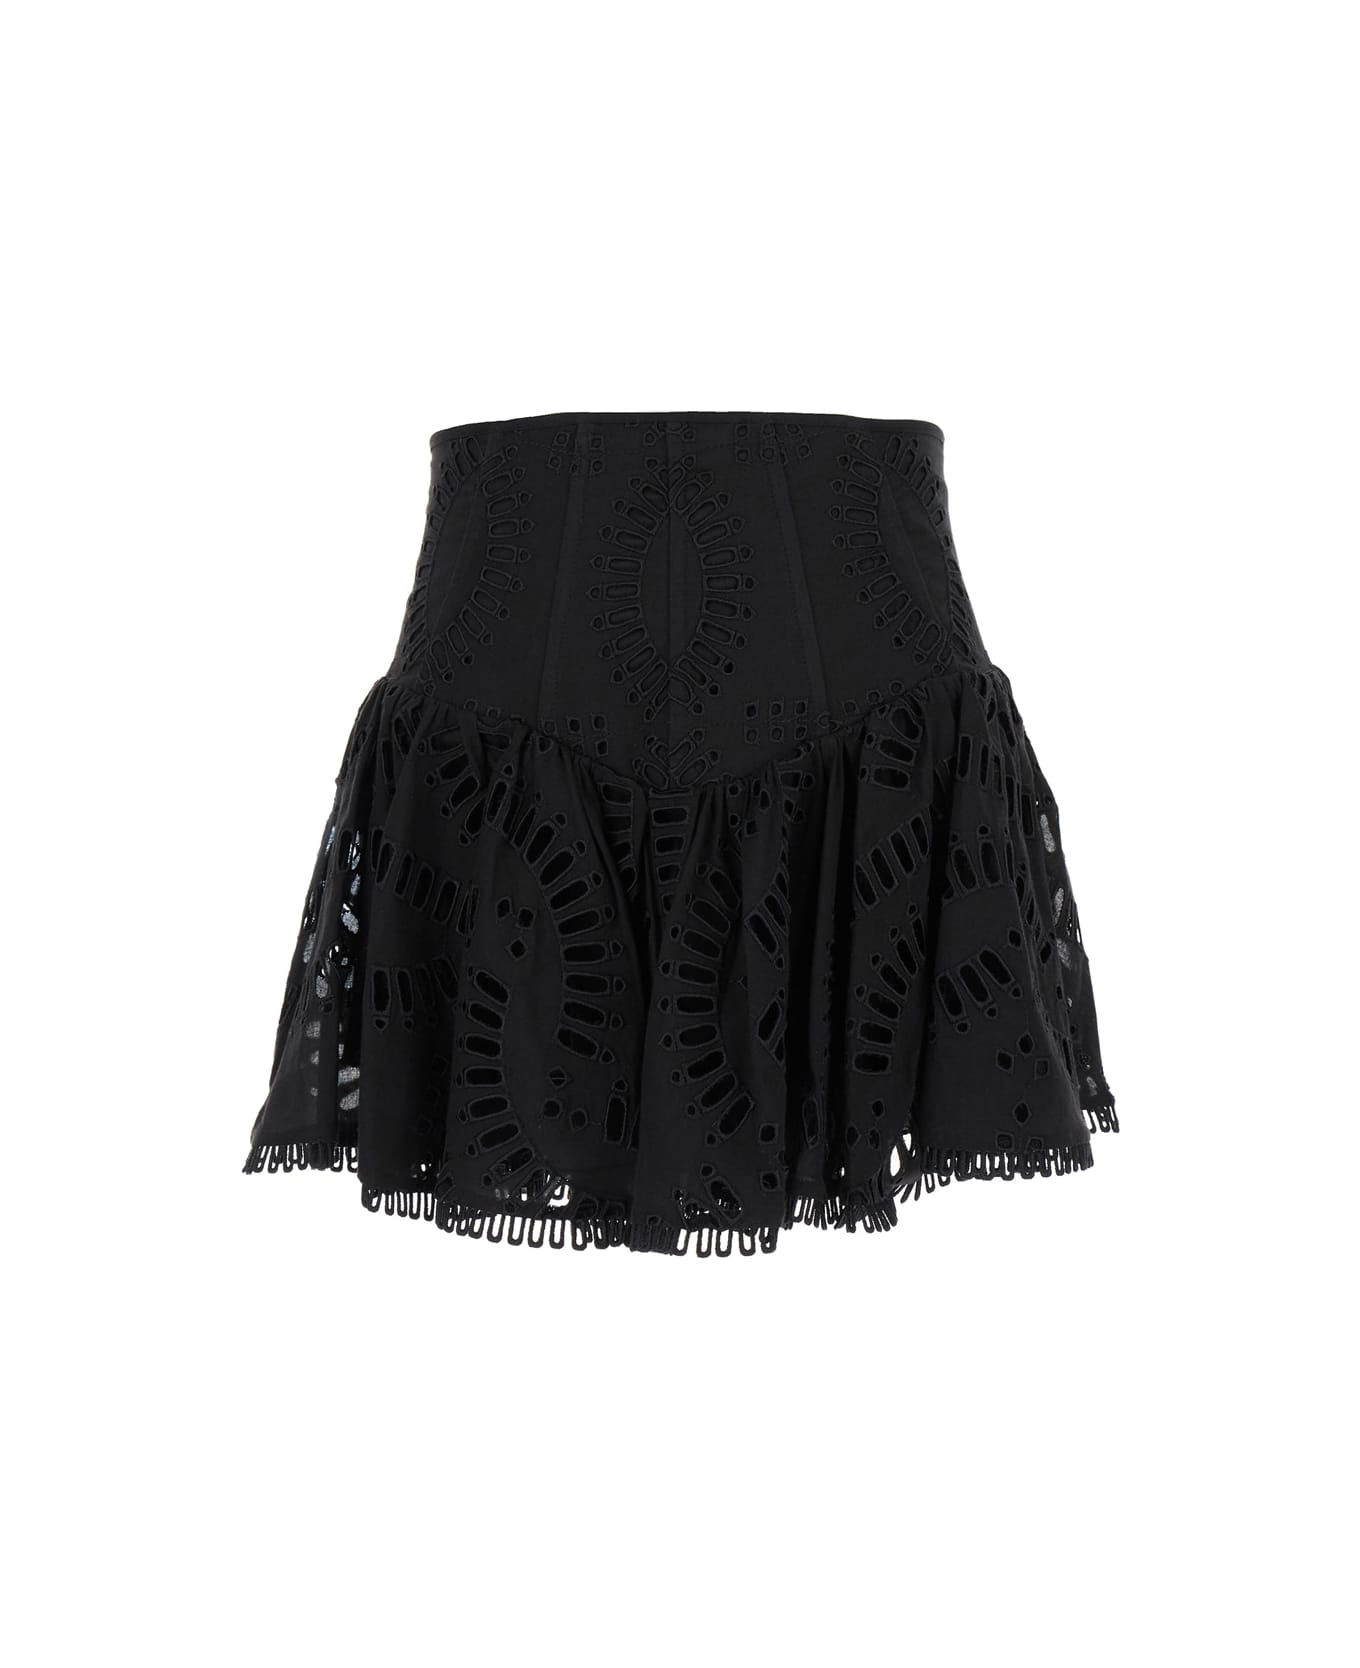 Charo Ruiz Black High Waisted 'favik' Miniskirt With Embroidery In Cotton Blend Woman - Black スカート